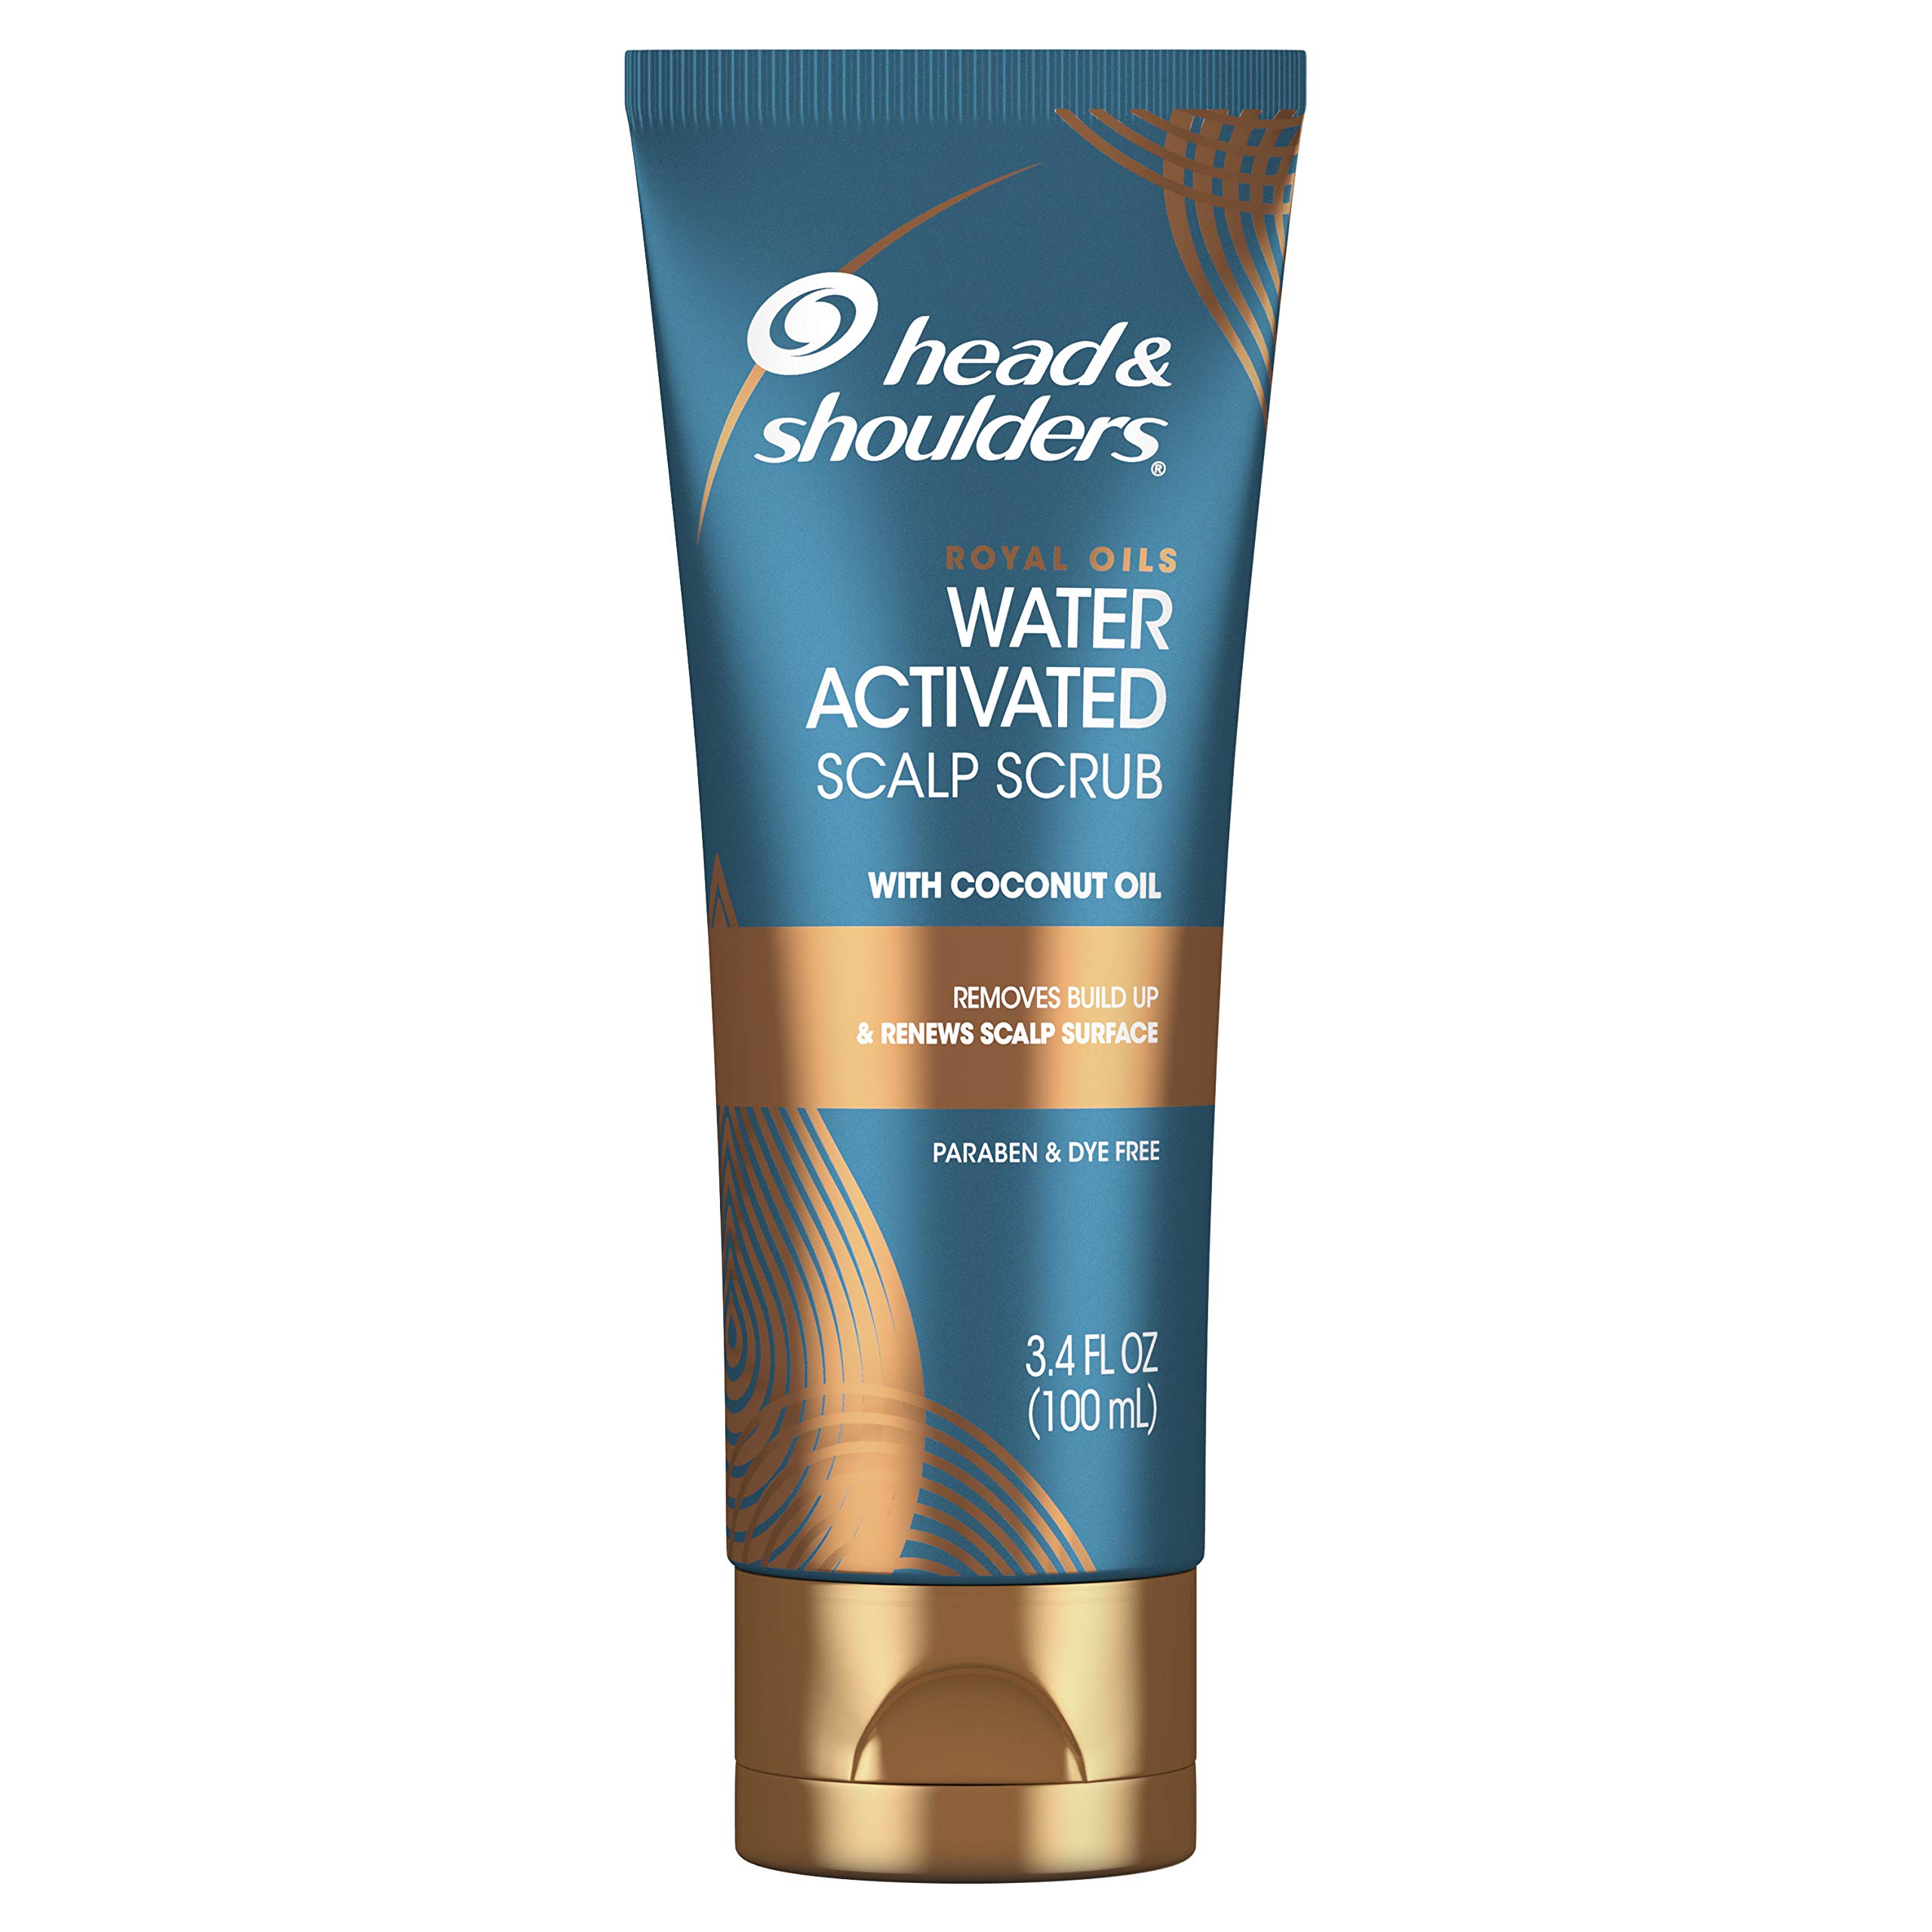 Head & Shoulders Royal Oils Water Activated Scalp Scrub With Coconut Oil Dye Free, 3.4 Fl Oz